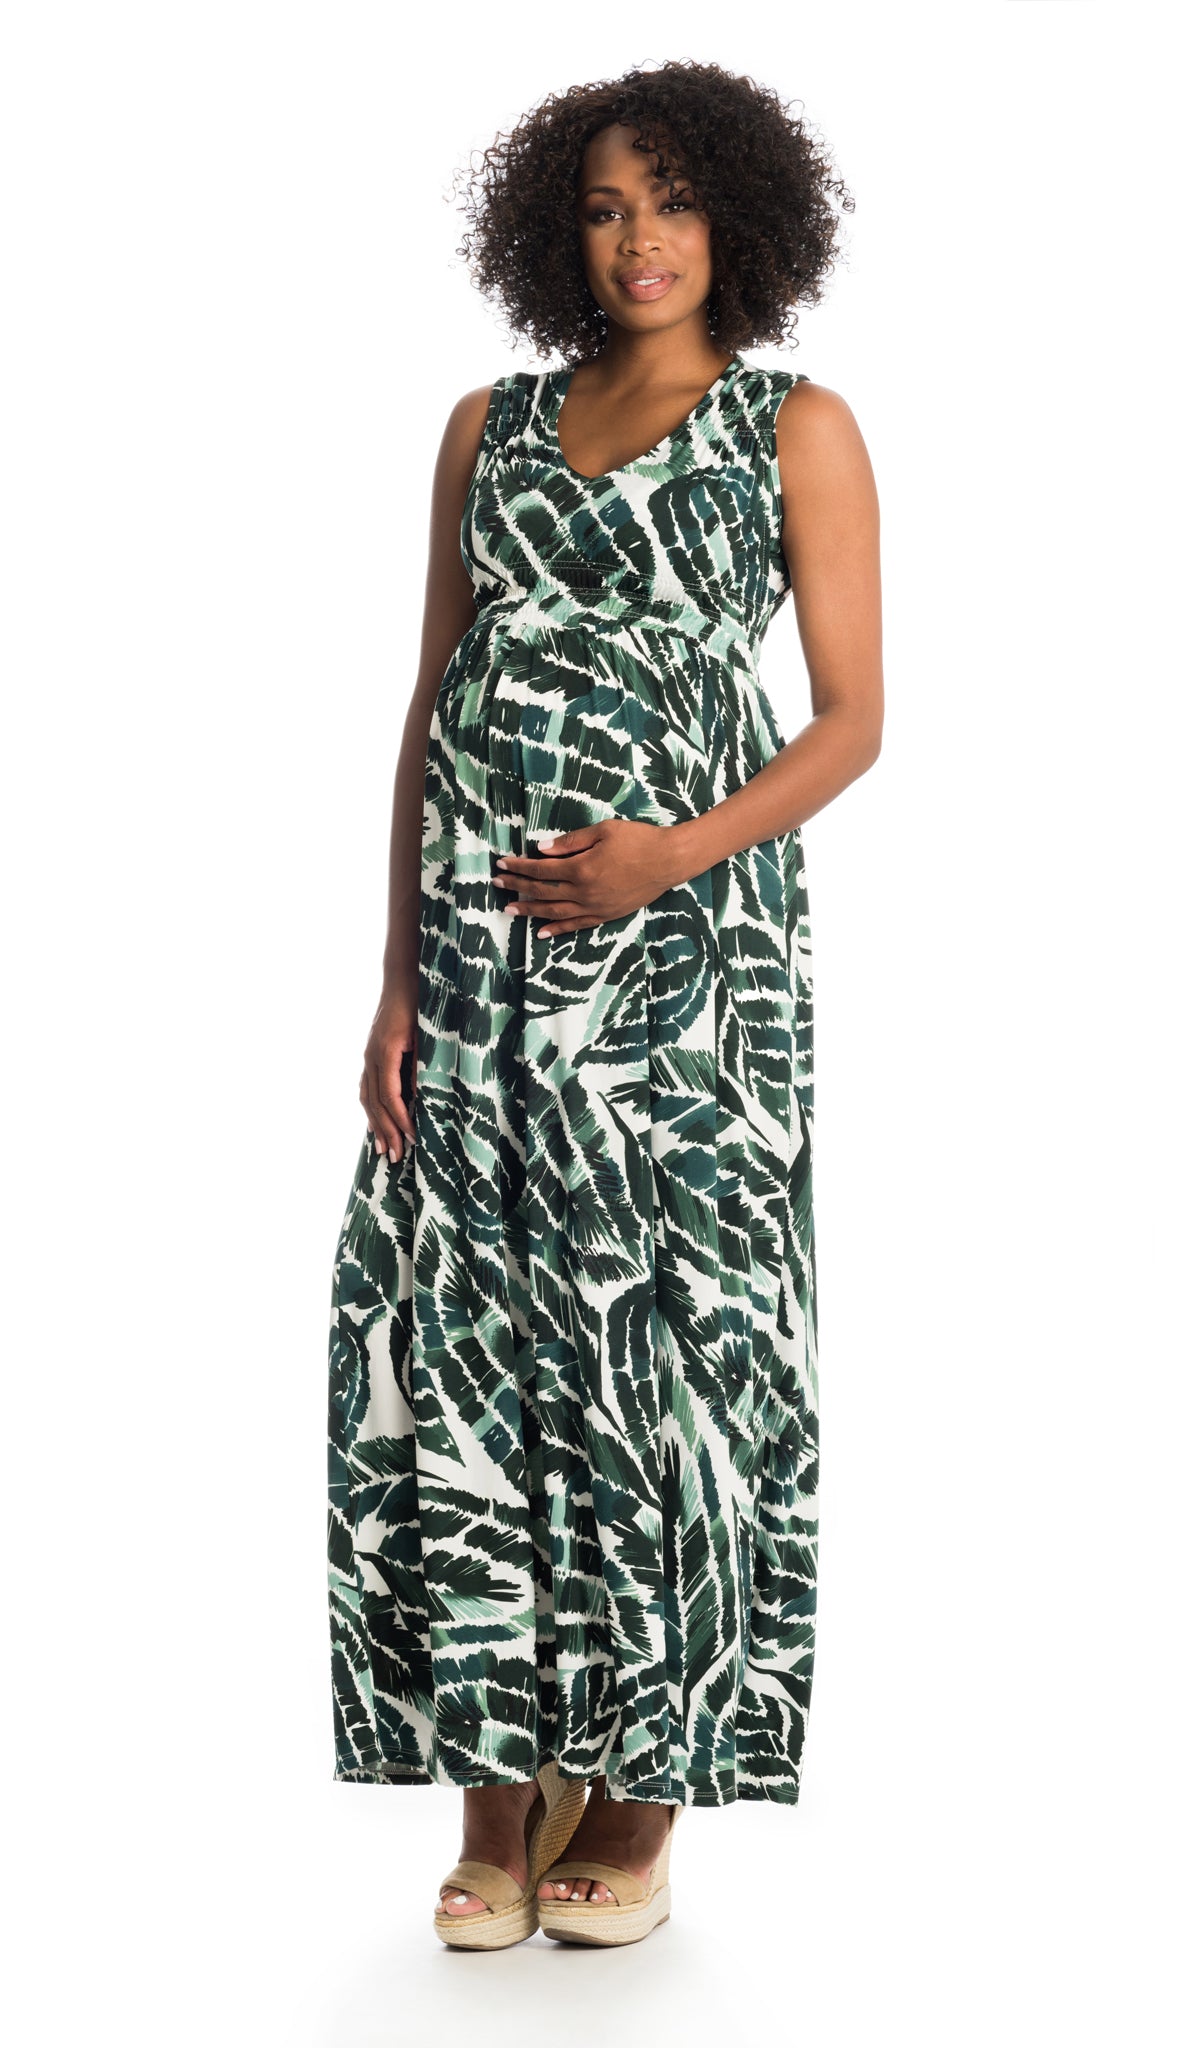 Palm Valeria dress worn by pregnant woman with one hand on her belly.